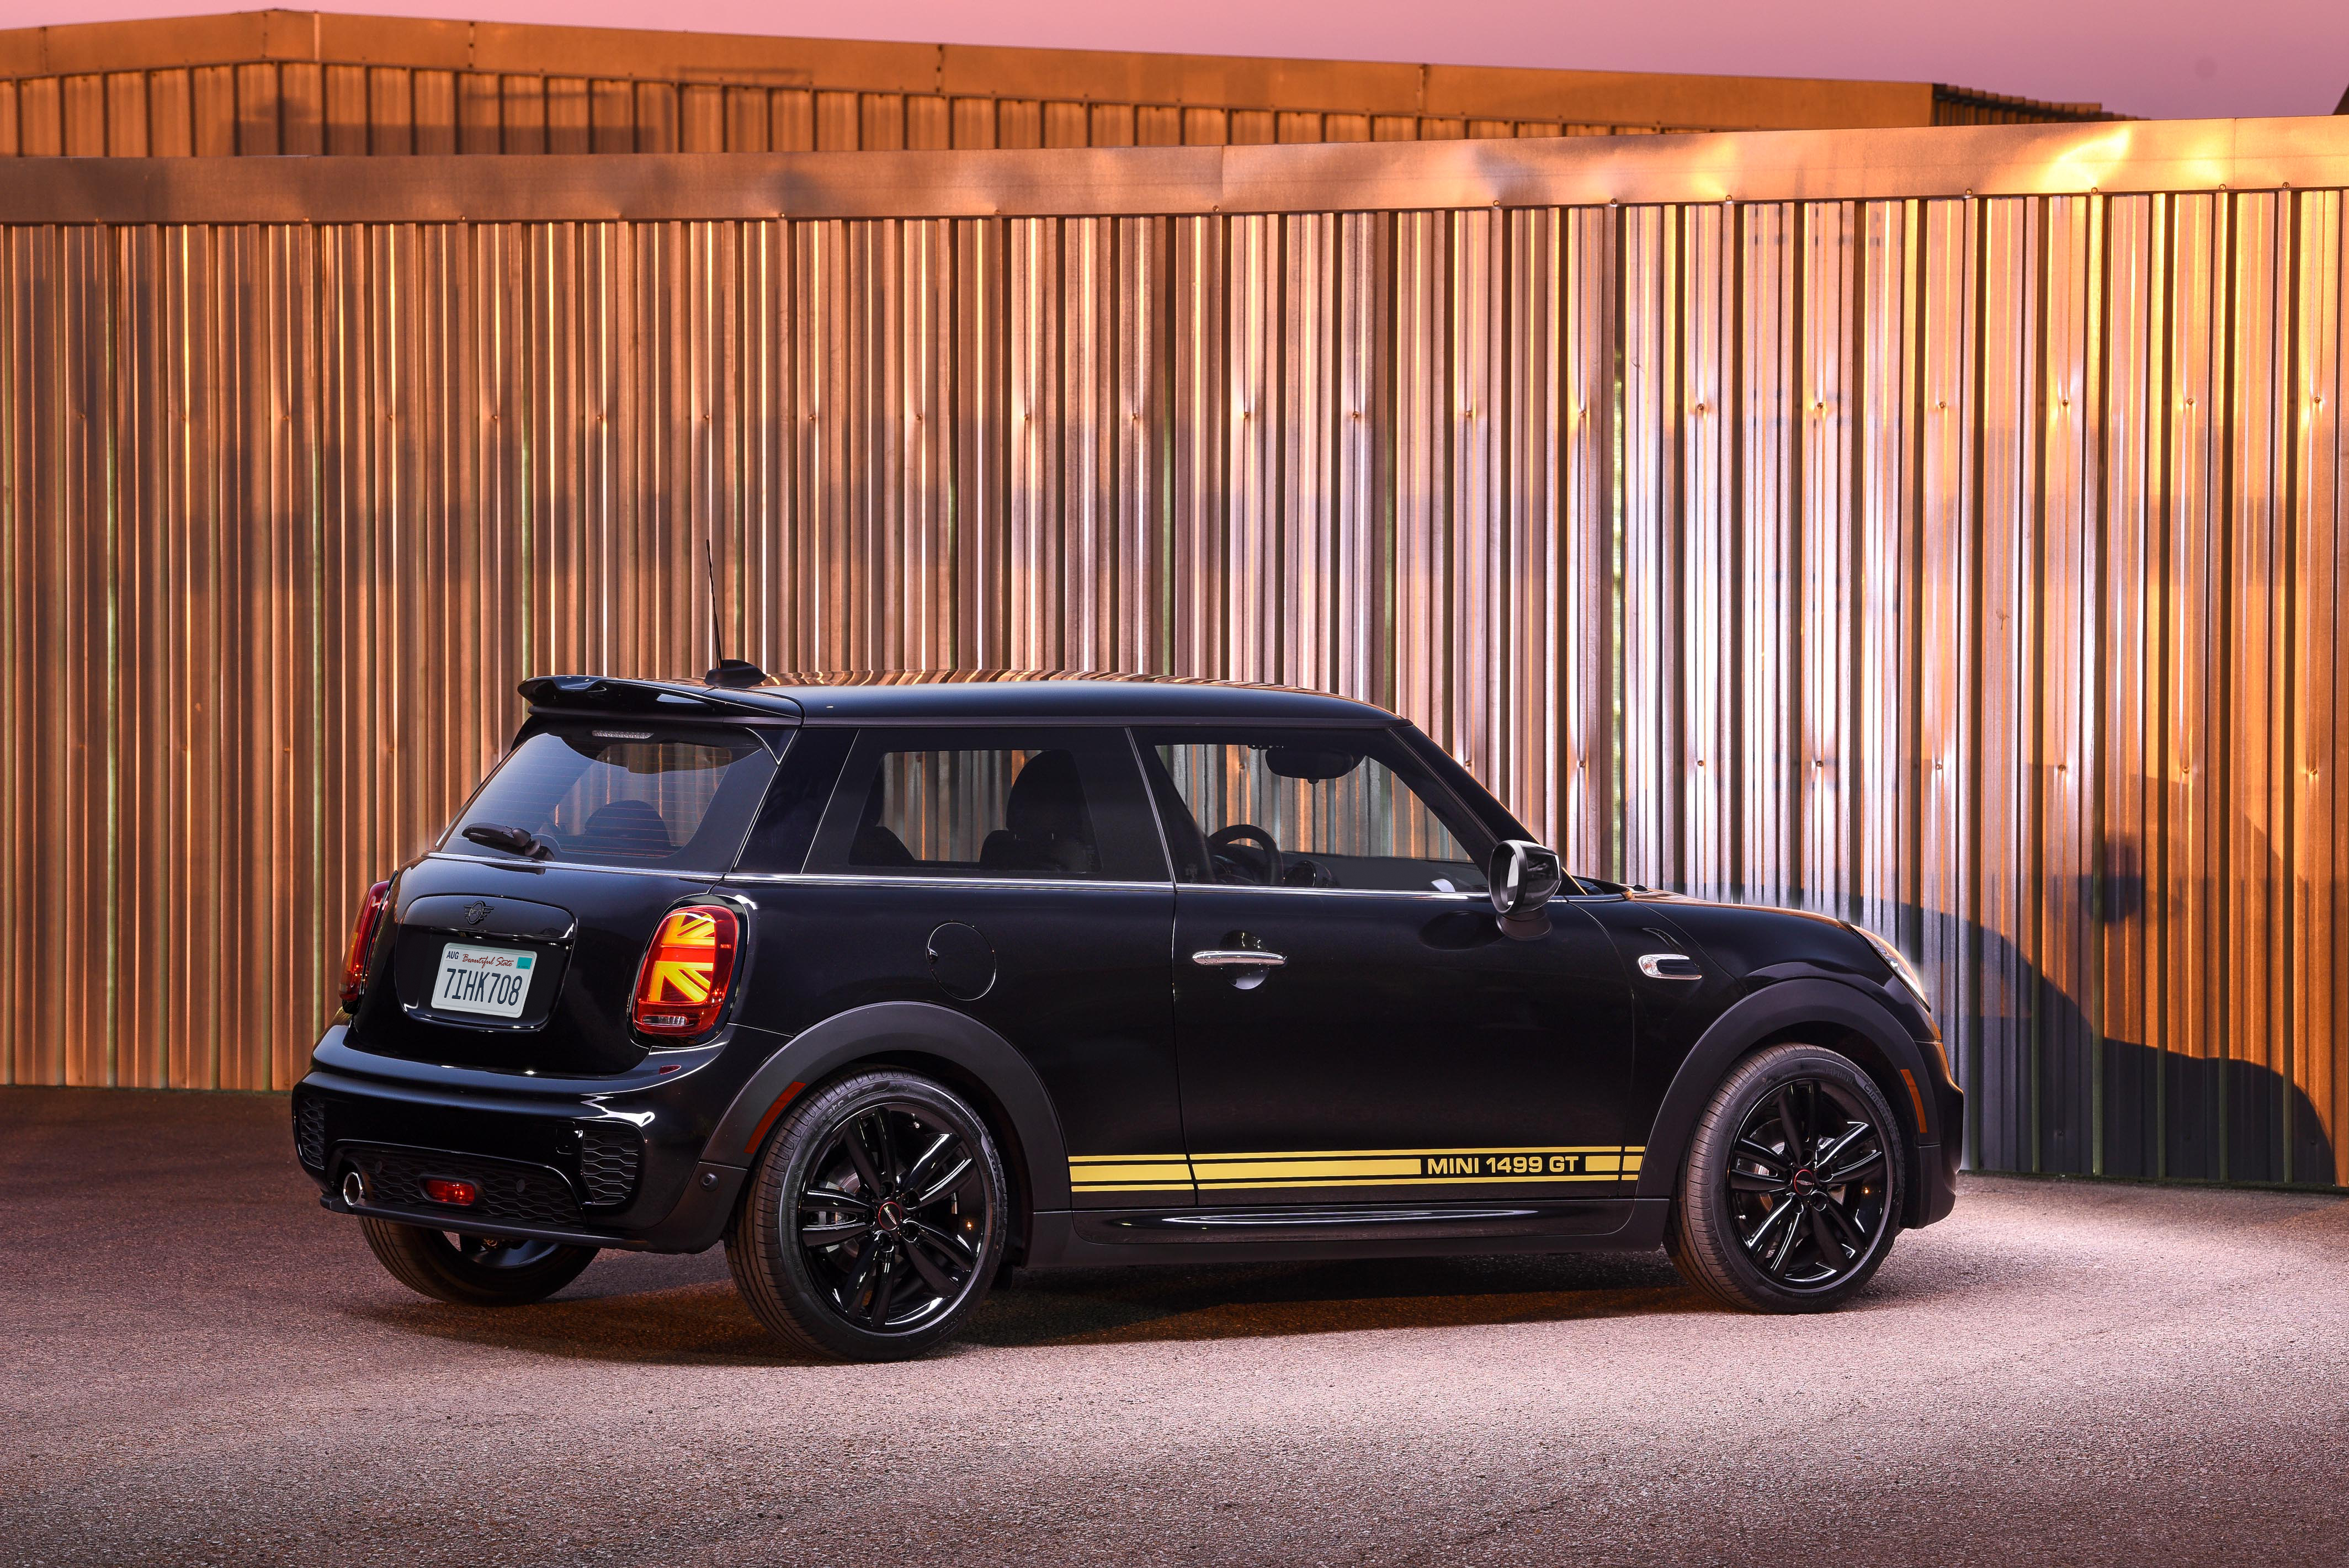 MINI USA Adds Two Special Edition Models to Lineup